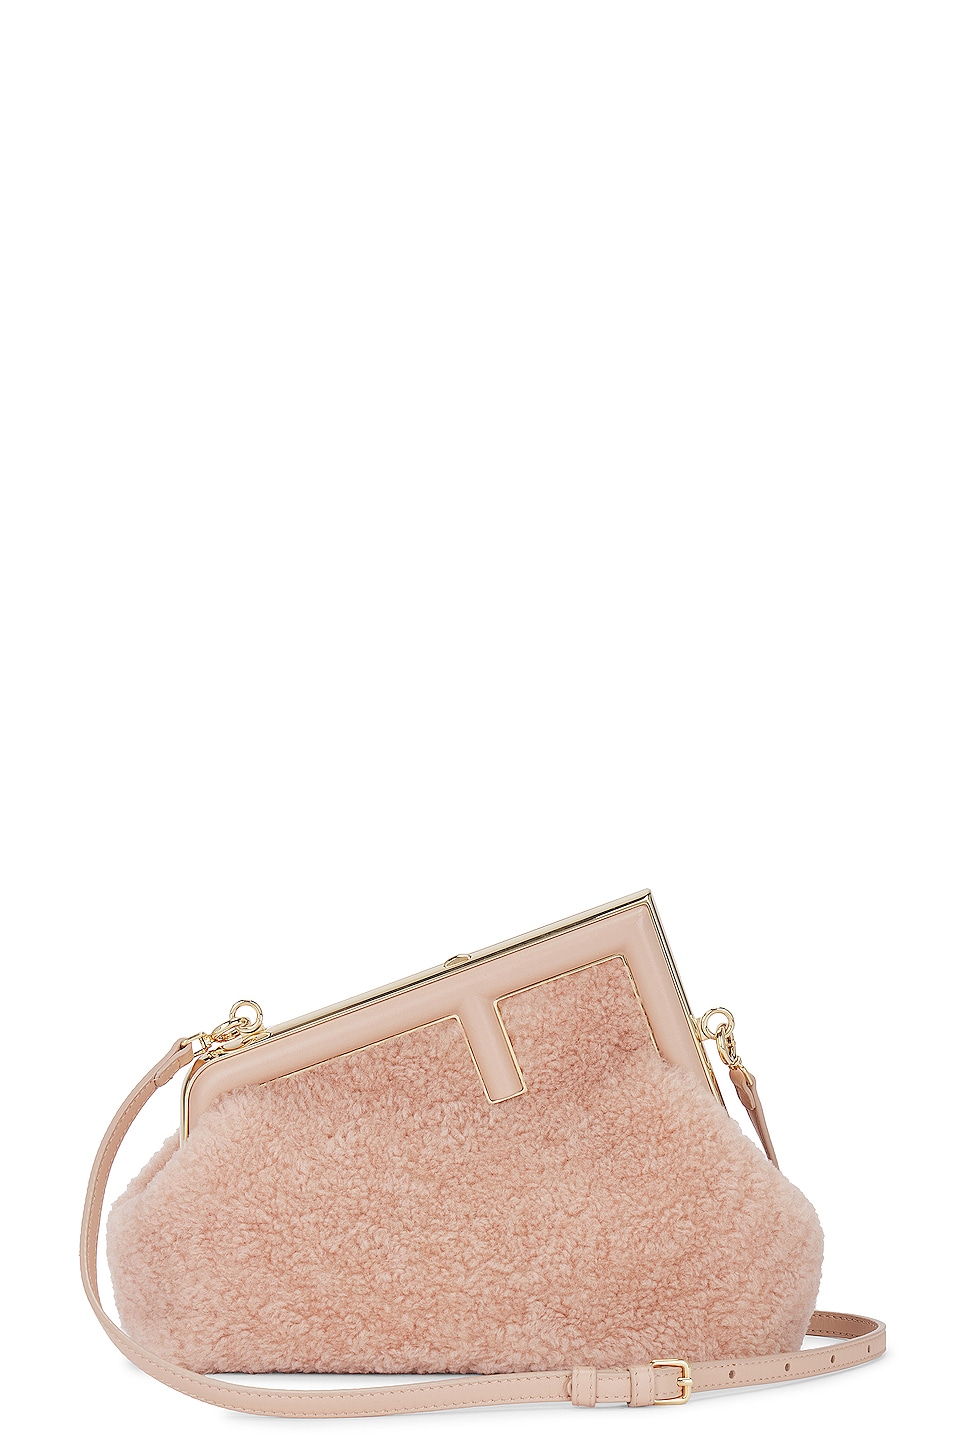 Shearling First Bag in Blush